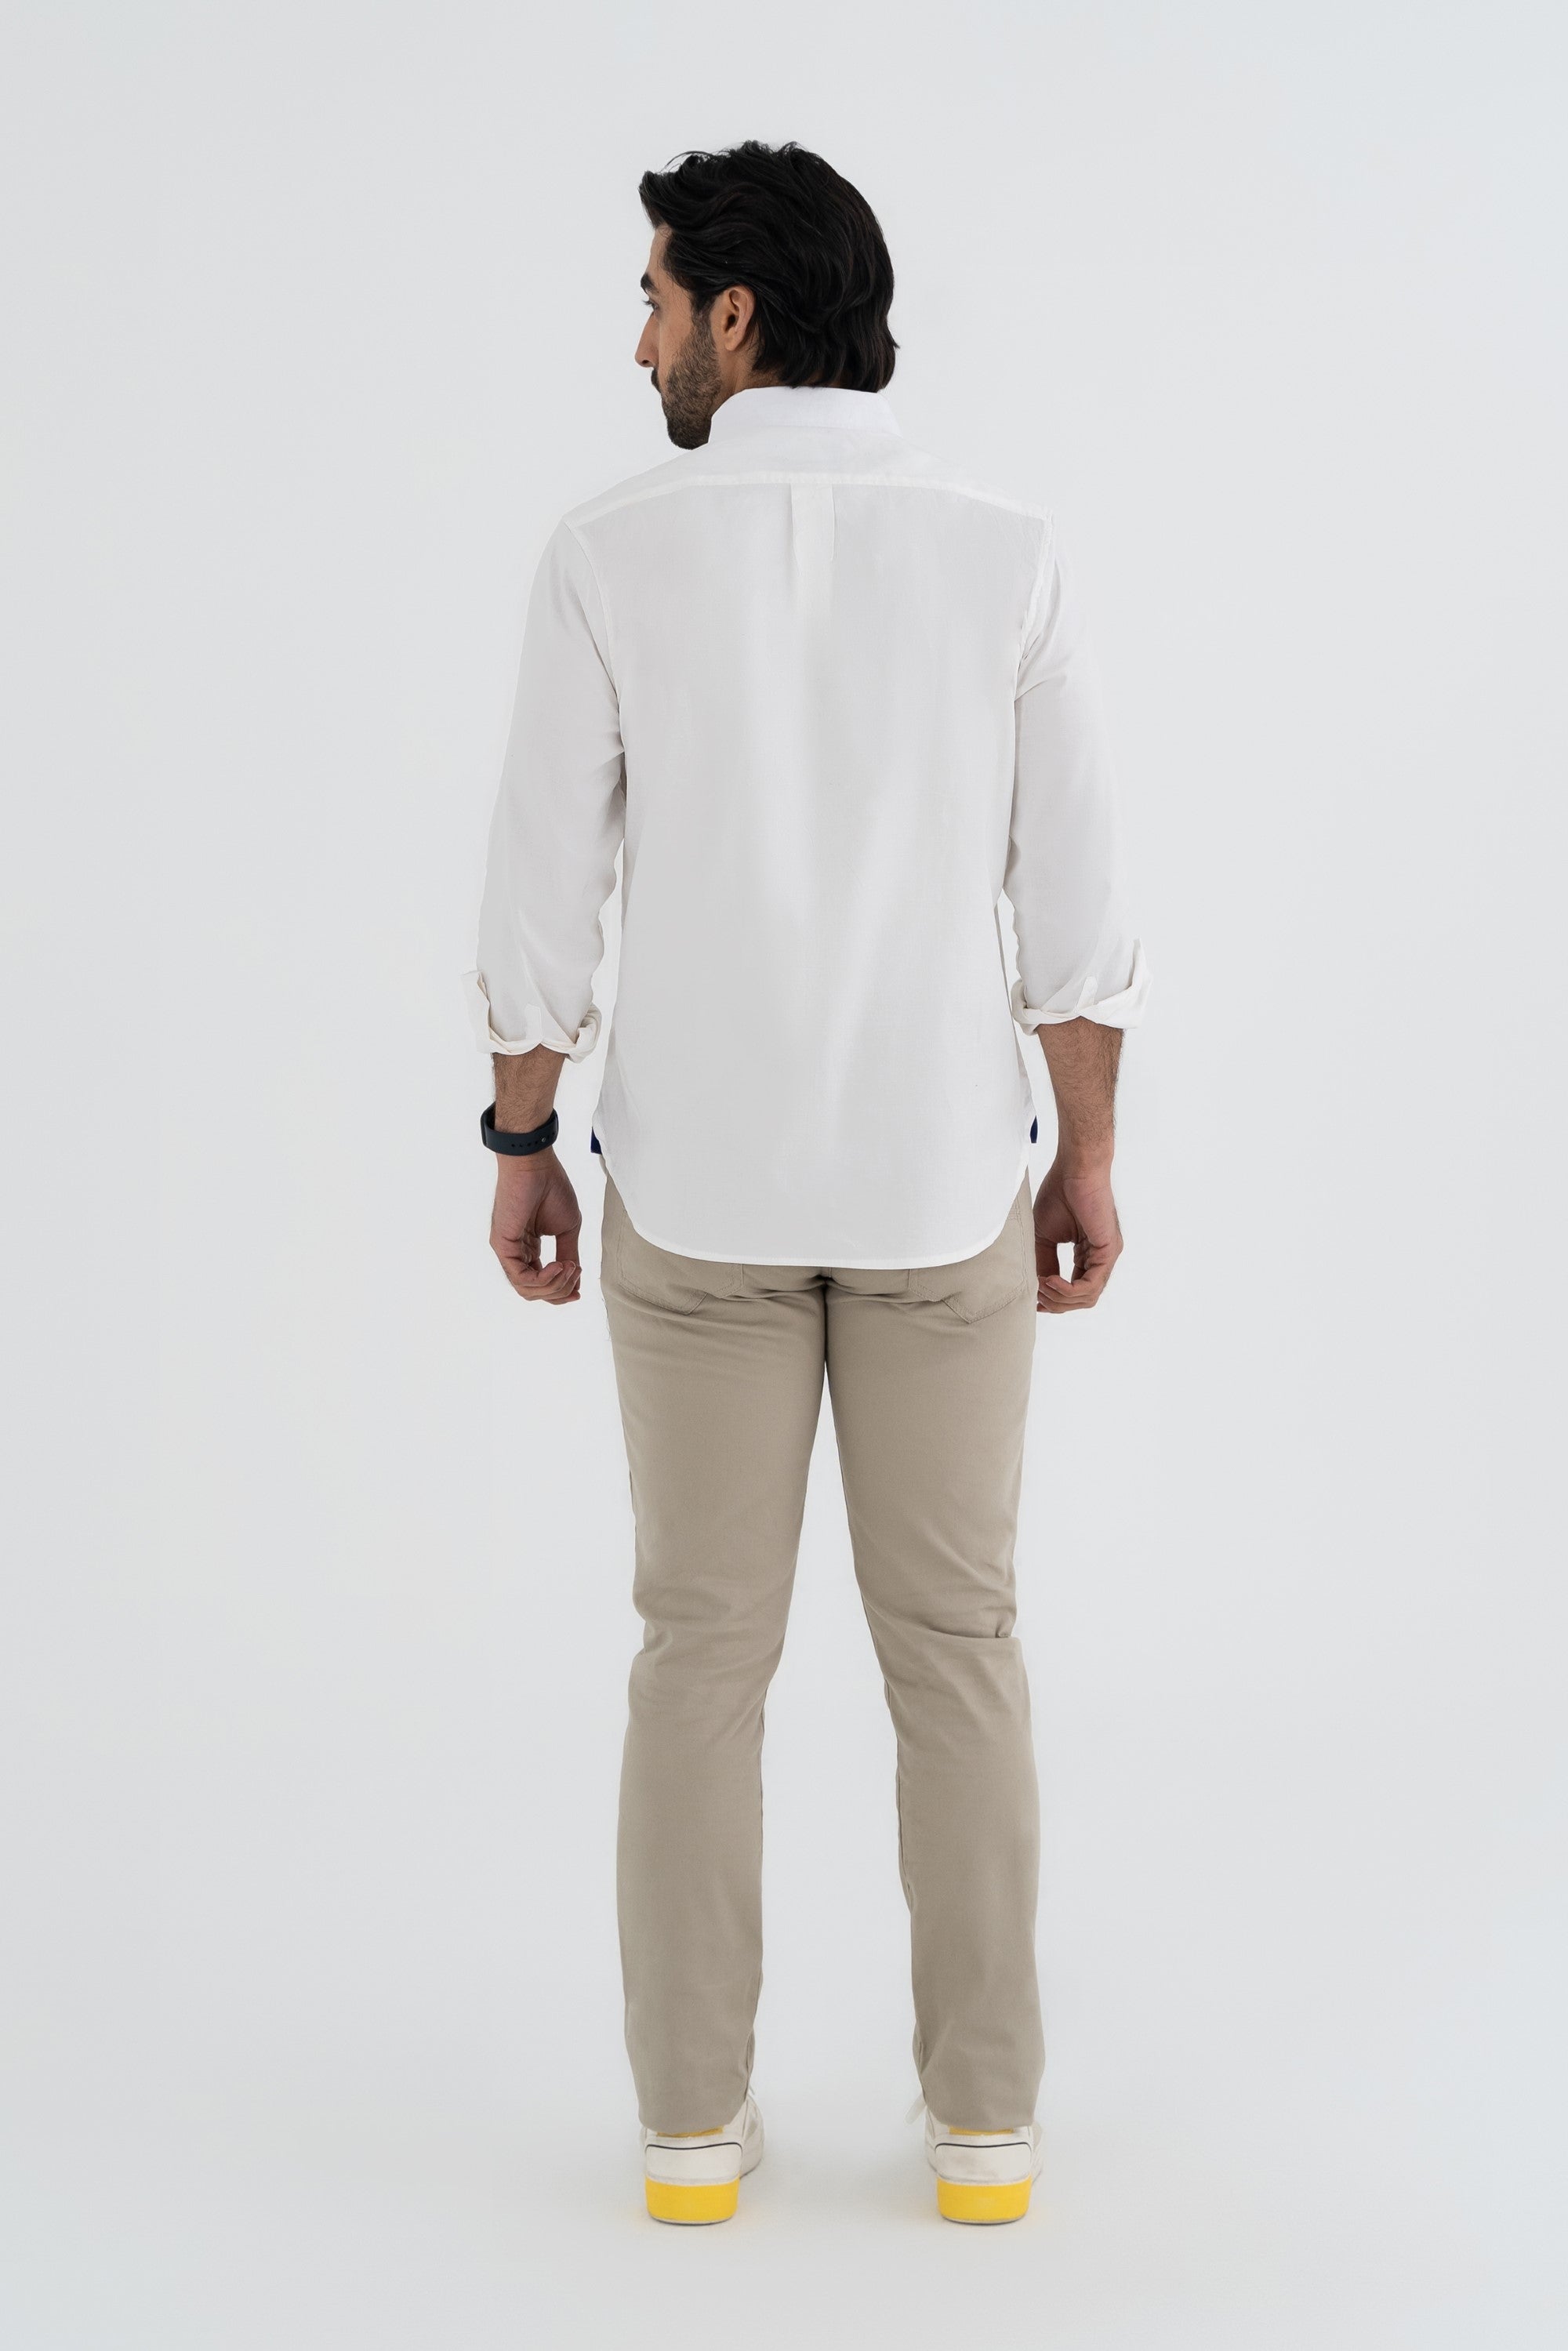 Casual Off White Shirt